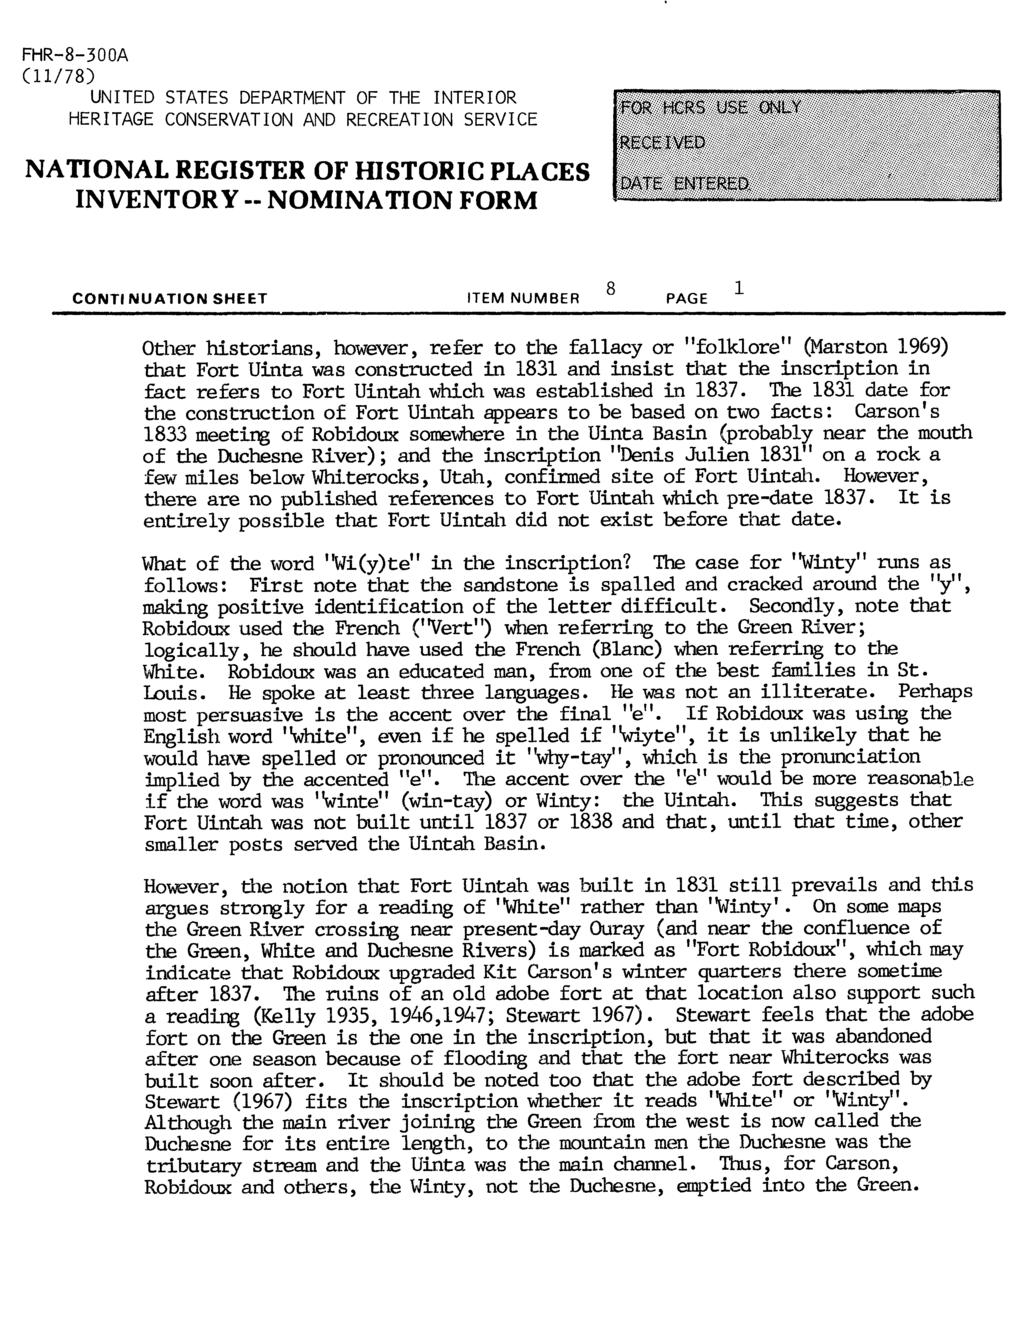 FHR-8-300A (11/78) UNITED STATES DEPARTMENT OF THE INTERIOR HERITAGE CONSERVATION AND RECREATION SERVICE NATIONAL REGISTER OF HISTORIC PLACES INVENTORY -- NOMINATION FORM CONTI NUATION SHEET ITEM